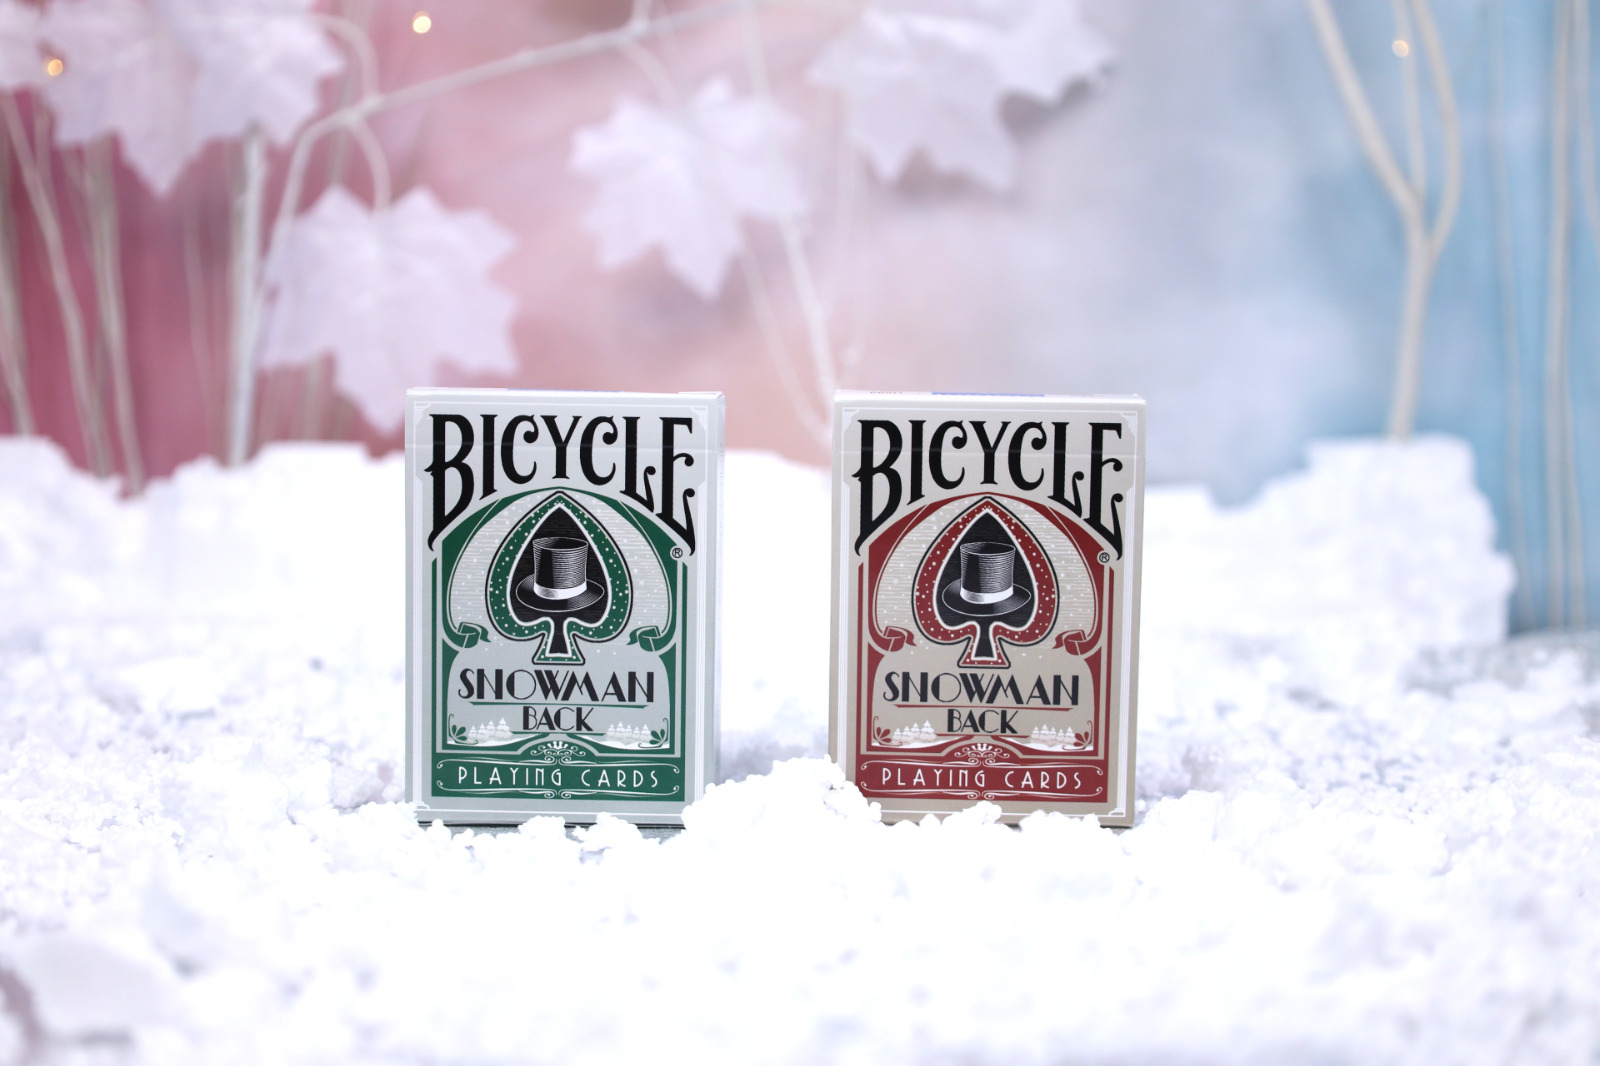 Snowman Back Red & Green Bicycle Playing Cards 2 Deck Set